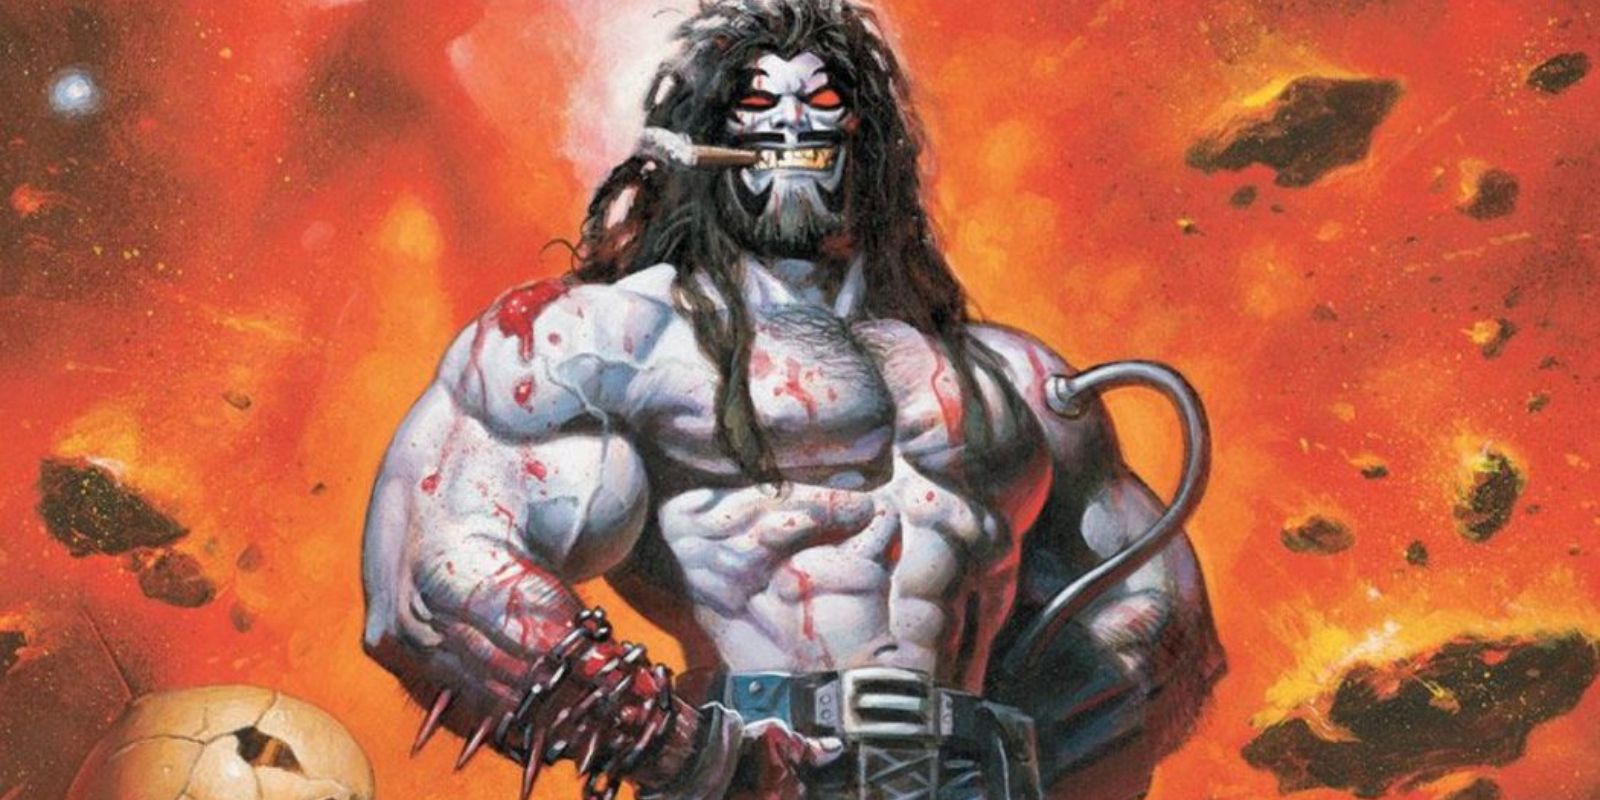 Lobo smoking a cigar while standing in space